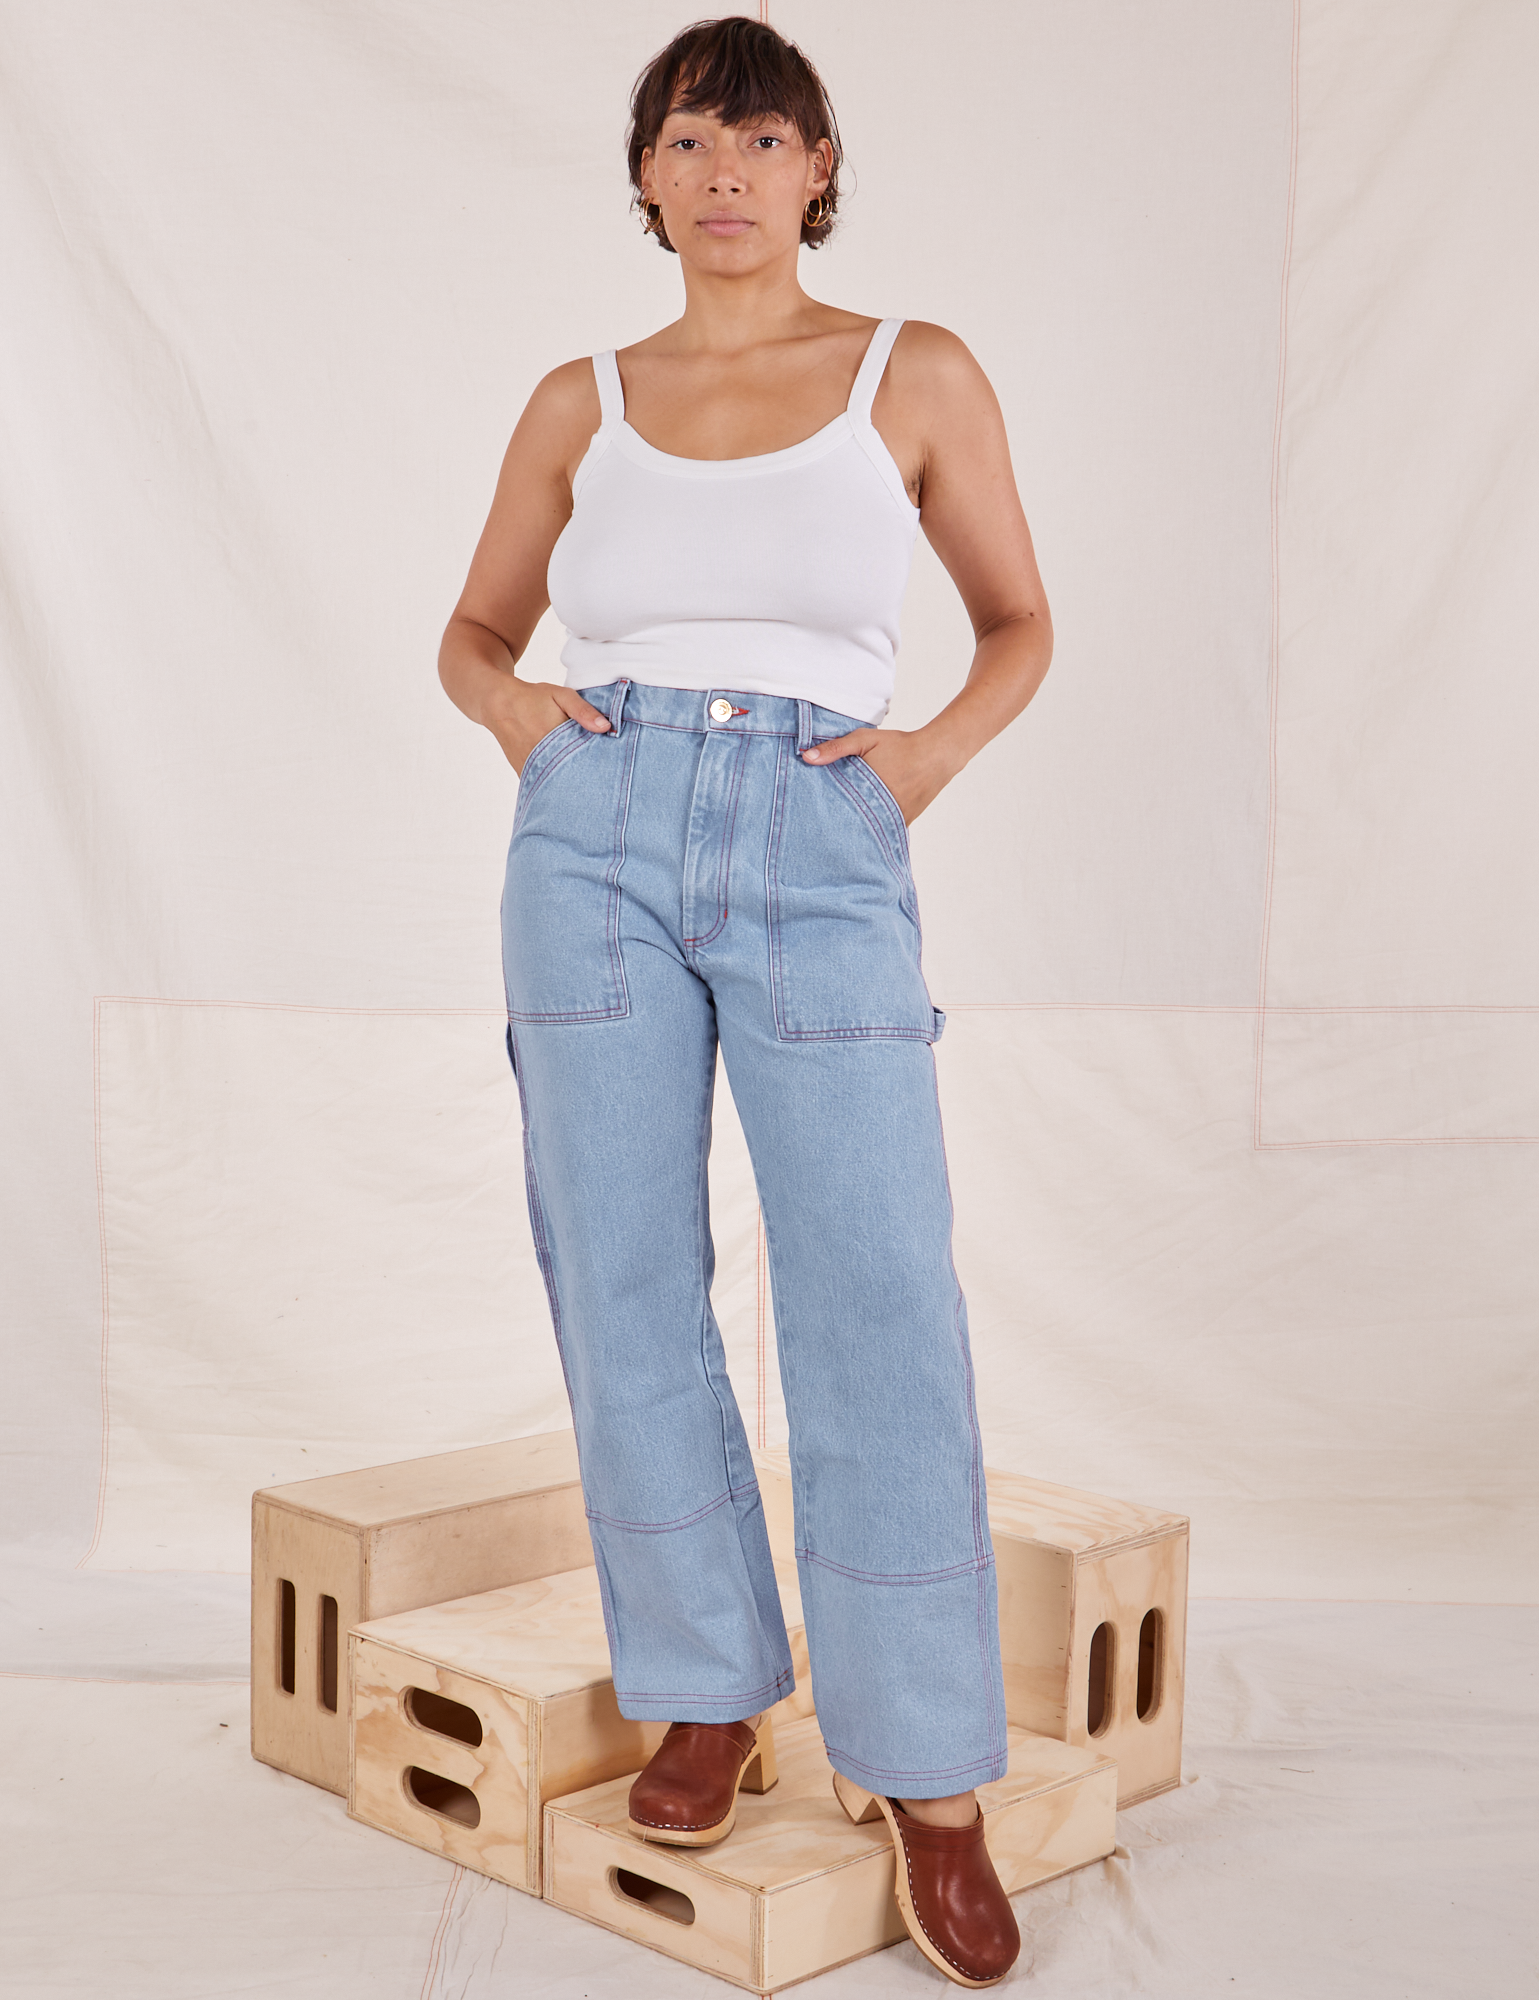 Tiara is 5'4" and wearing S Carpenter Jeans in Light Wash paired with Cropped Cami in vintage tee off-white